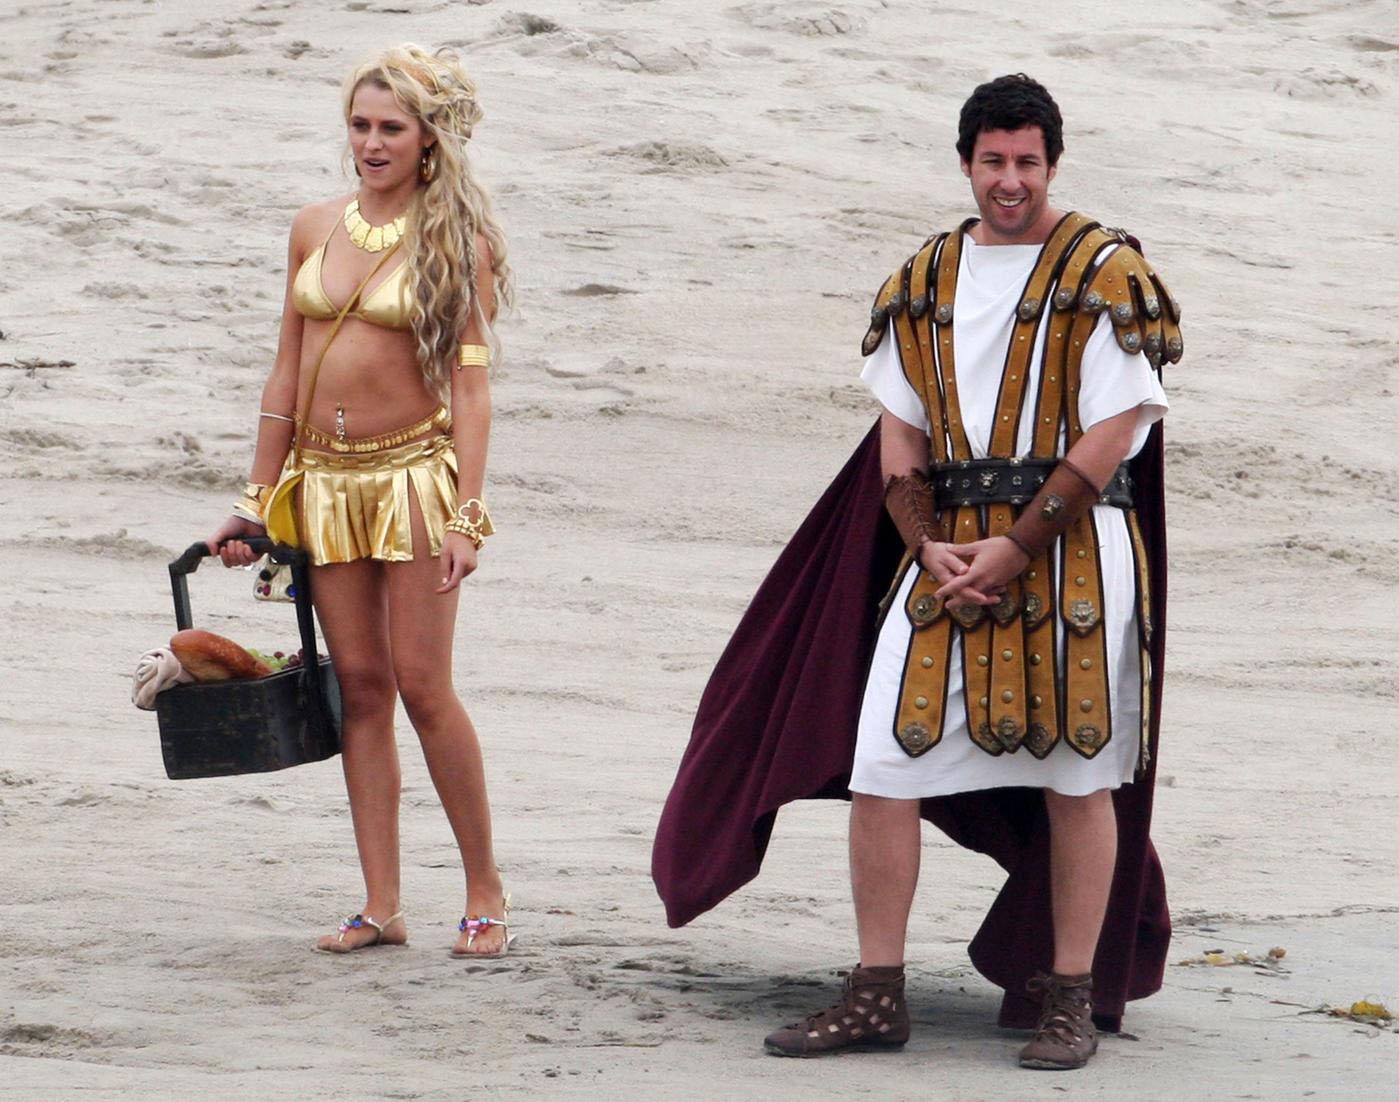 Teresa Palmer - #TBT to filming #BedtimeStories with funny man When are we having another beach picnic?!